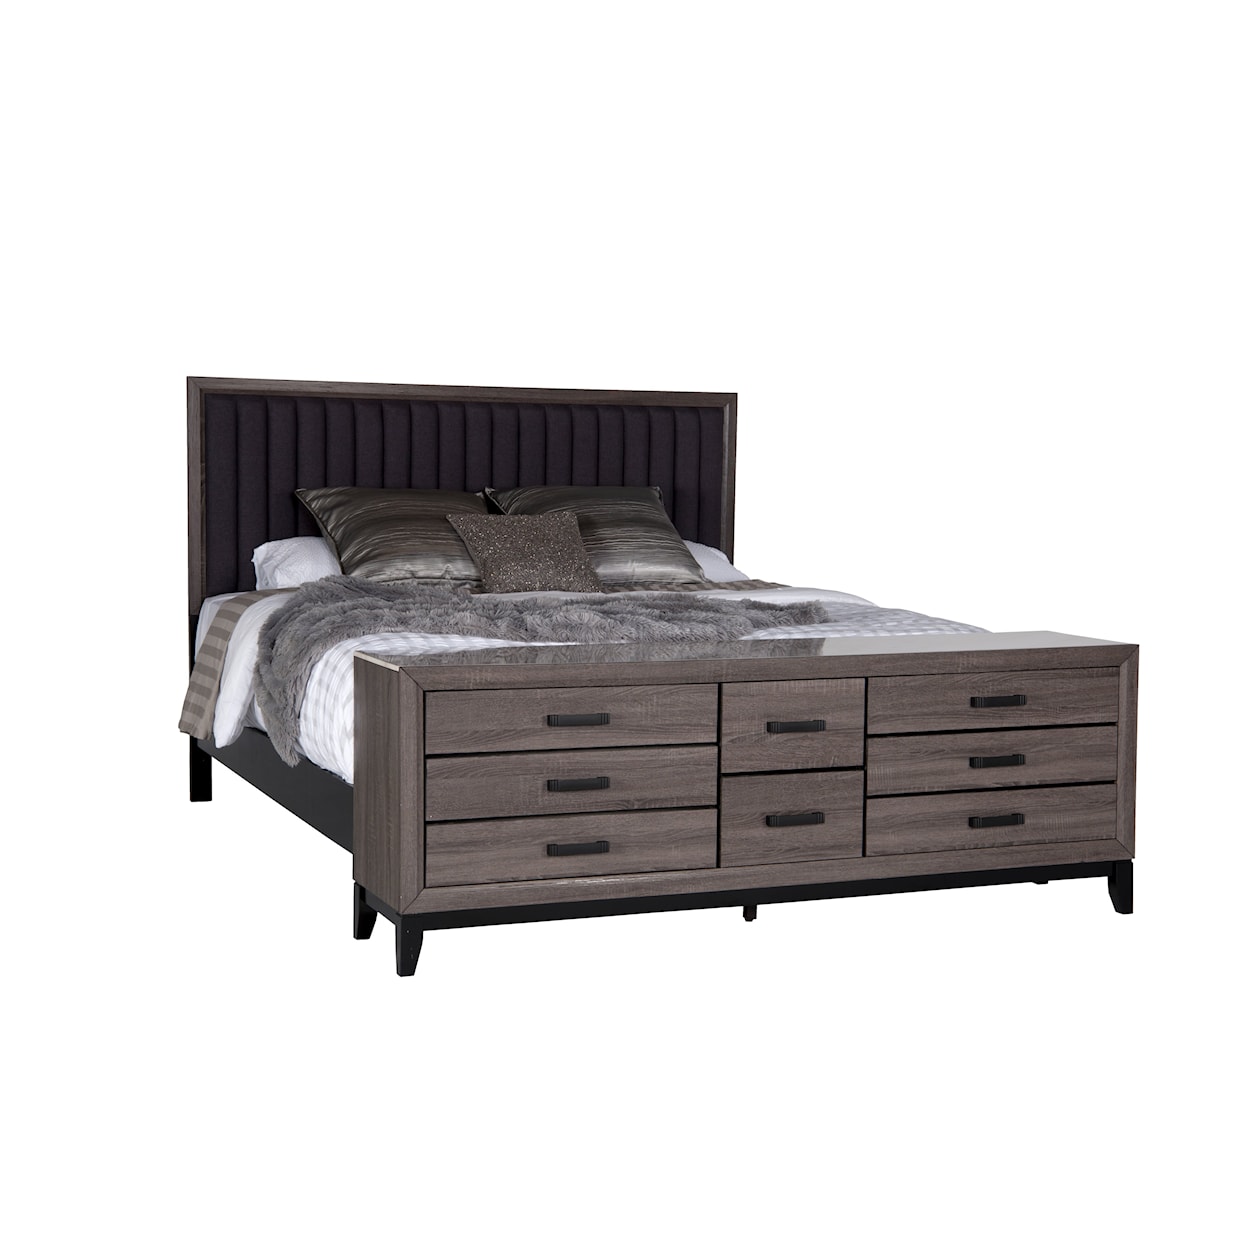 Global Furniture LAURA Queen Bed with Storage